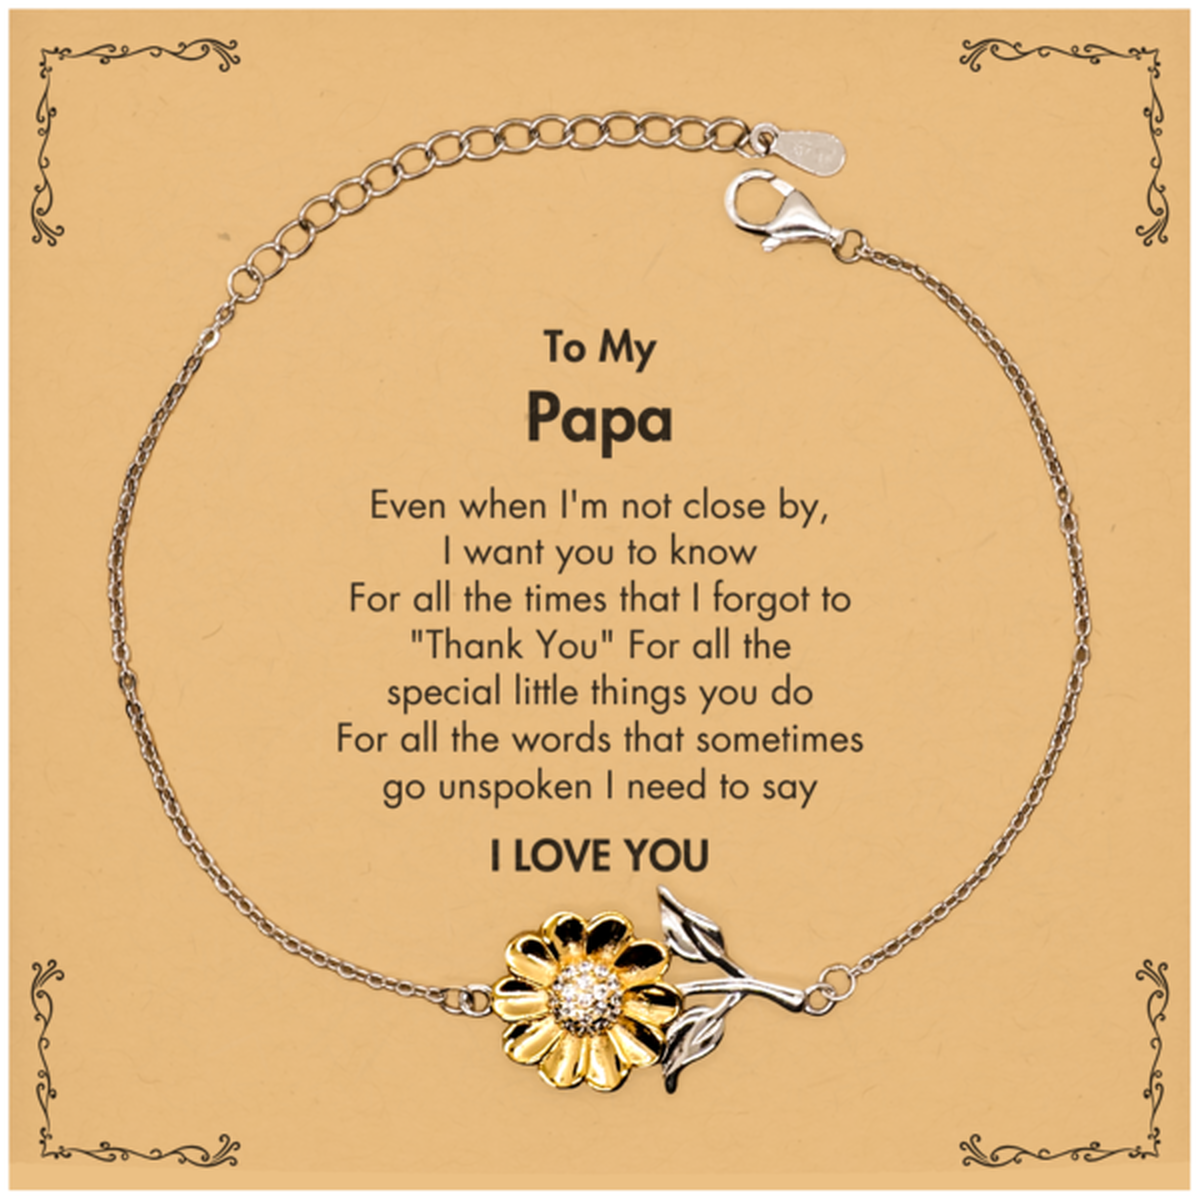 Thank You Gifts for Papa, Keepsake Sunflower Bracelet Gifts for Papa Birthday Mother's day Father's Day Papa For all the words That sometimes go unspoken I need to say I LOVE YOU